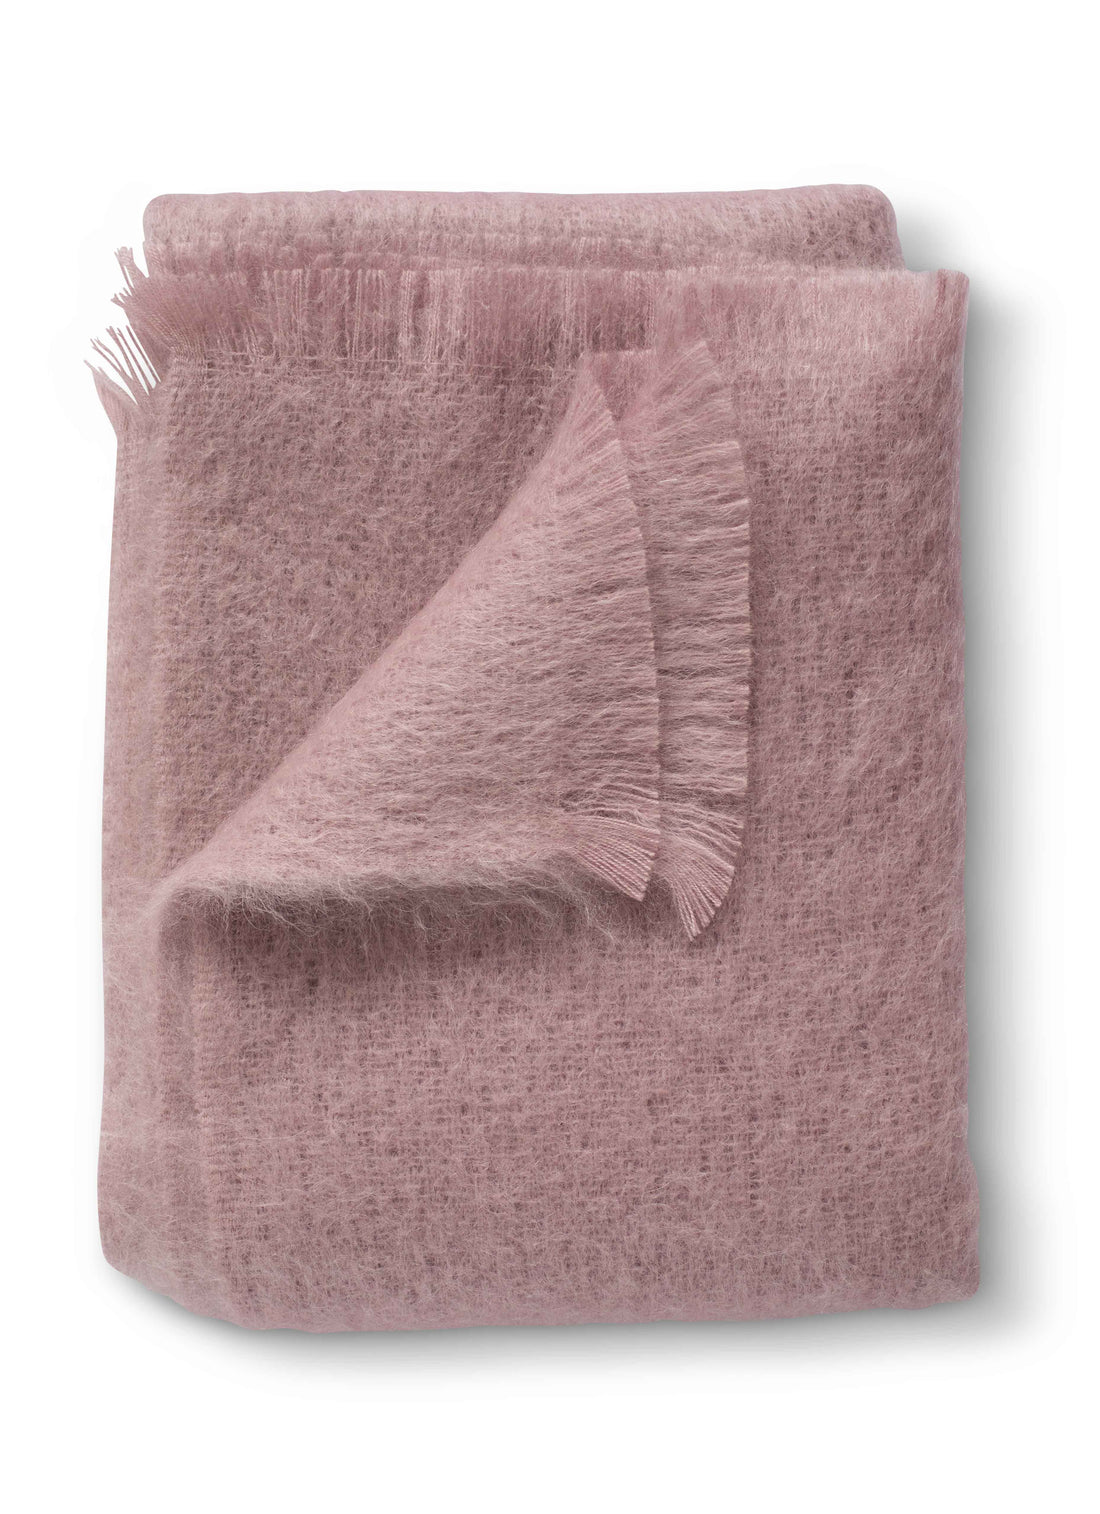 Folded rouge pink mohair throw blanket